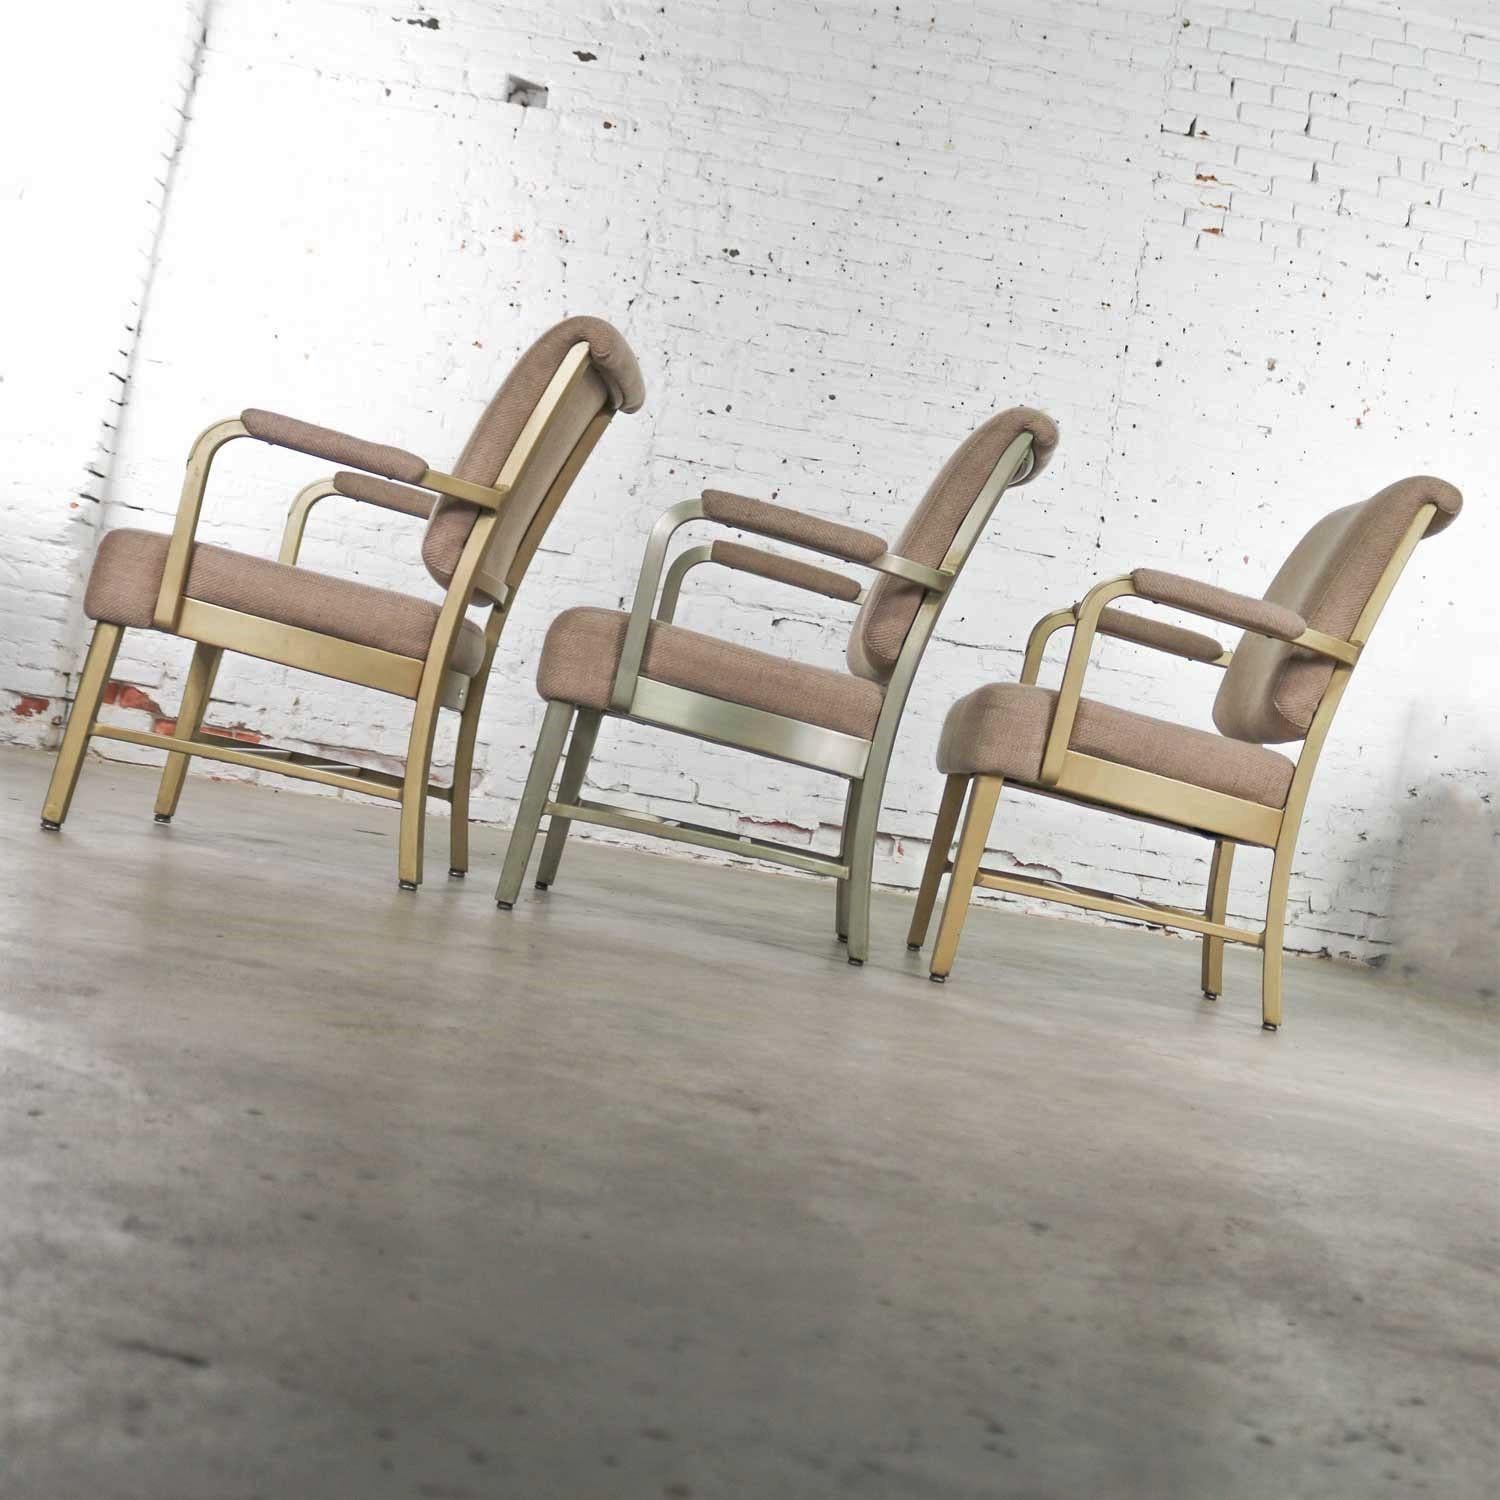 6 General Fireproofing Mid Century Machine Age Aluminum Goodform Armchairs For Sale 2